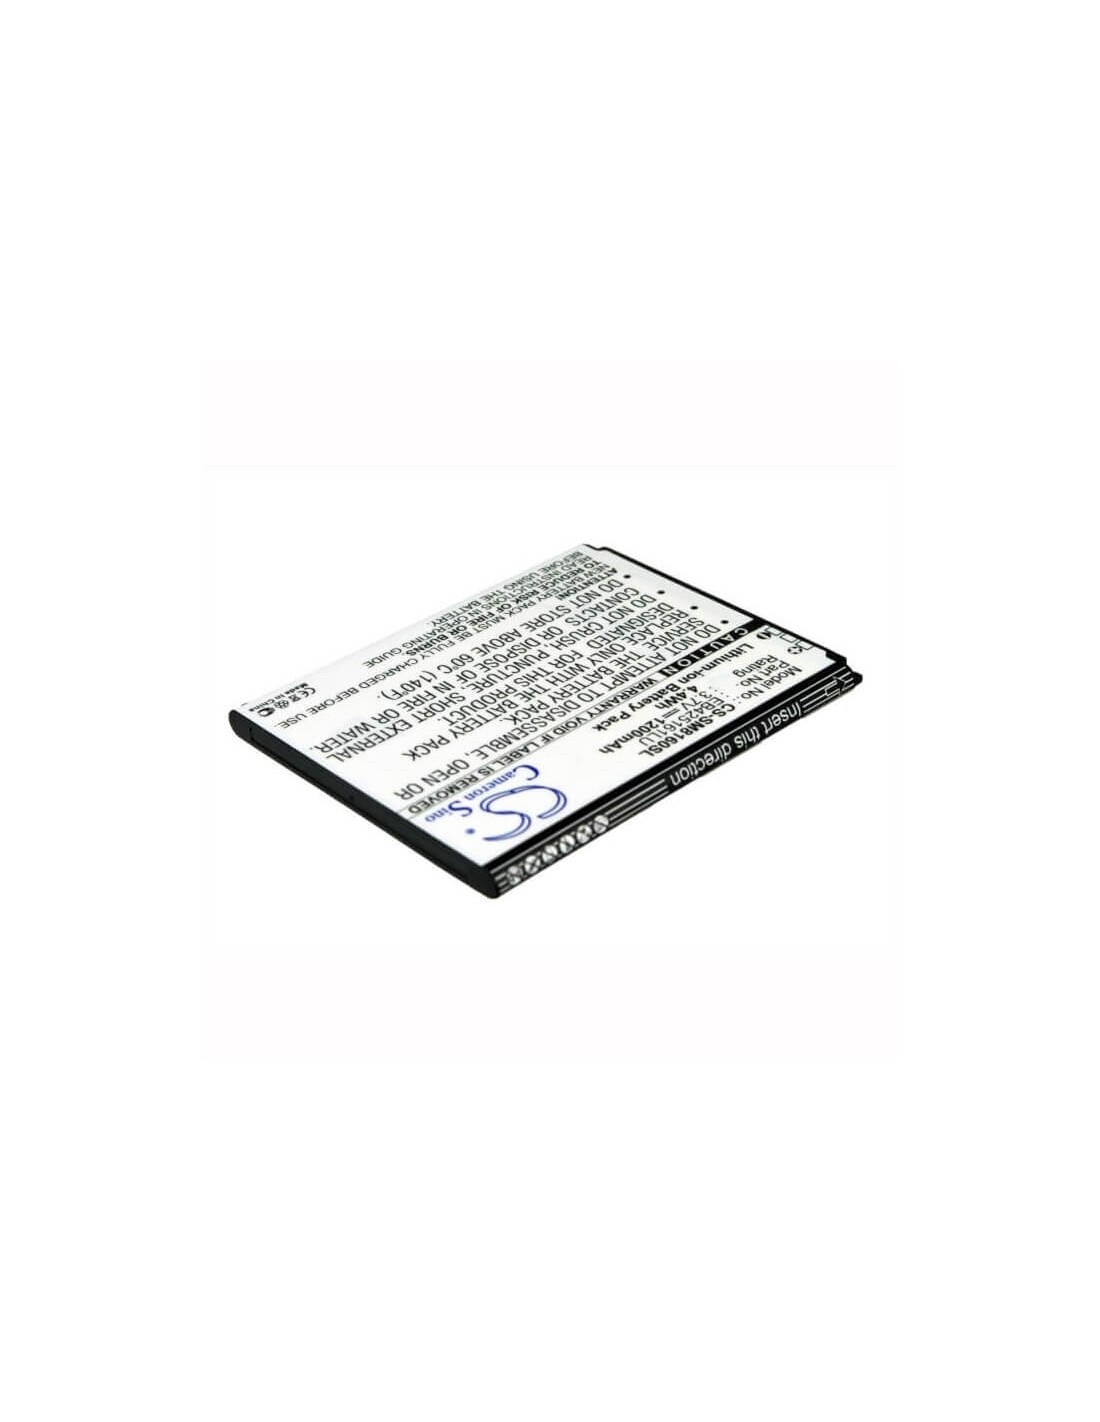 Battery for Samsung Galaxy Ace 2, GT-I8160, GT-I8160P 3.7V, 1200mAh - 4.44Wh